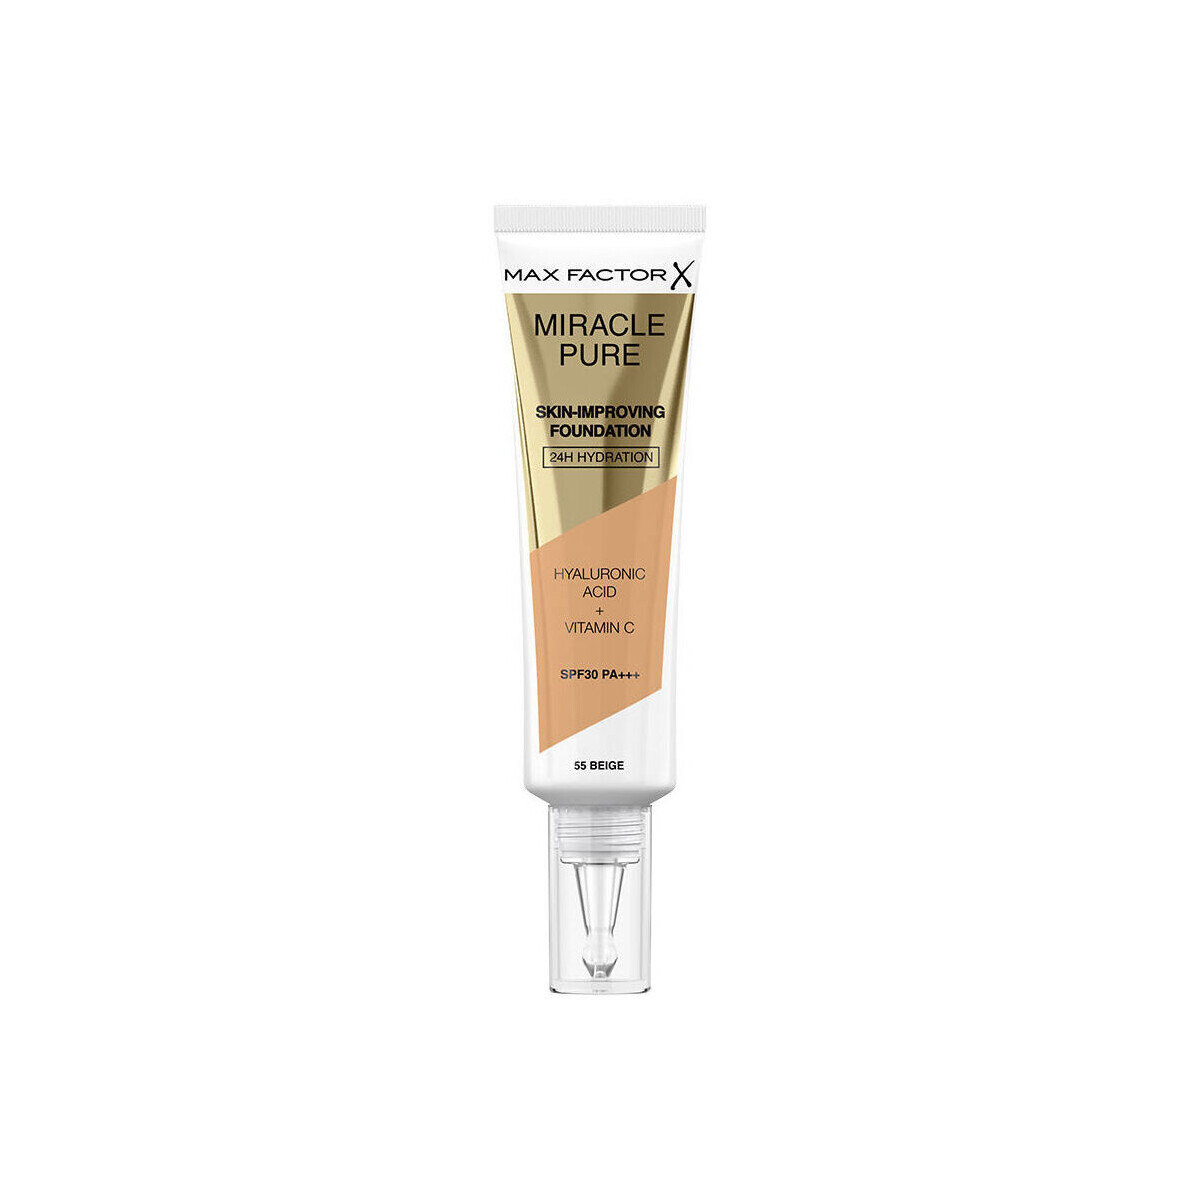 Beauty Make-up & Foundation  Max Factor Miracle Pure Foundation Spf30 55-beige 